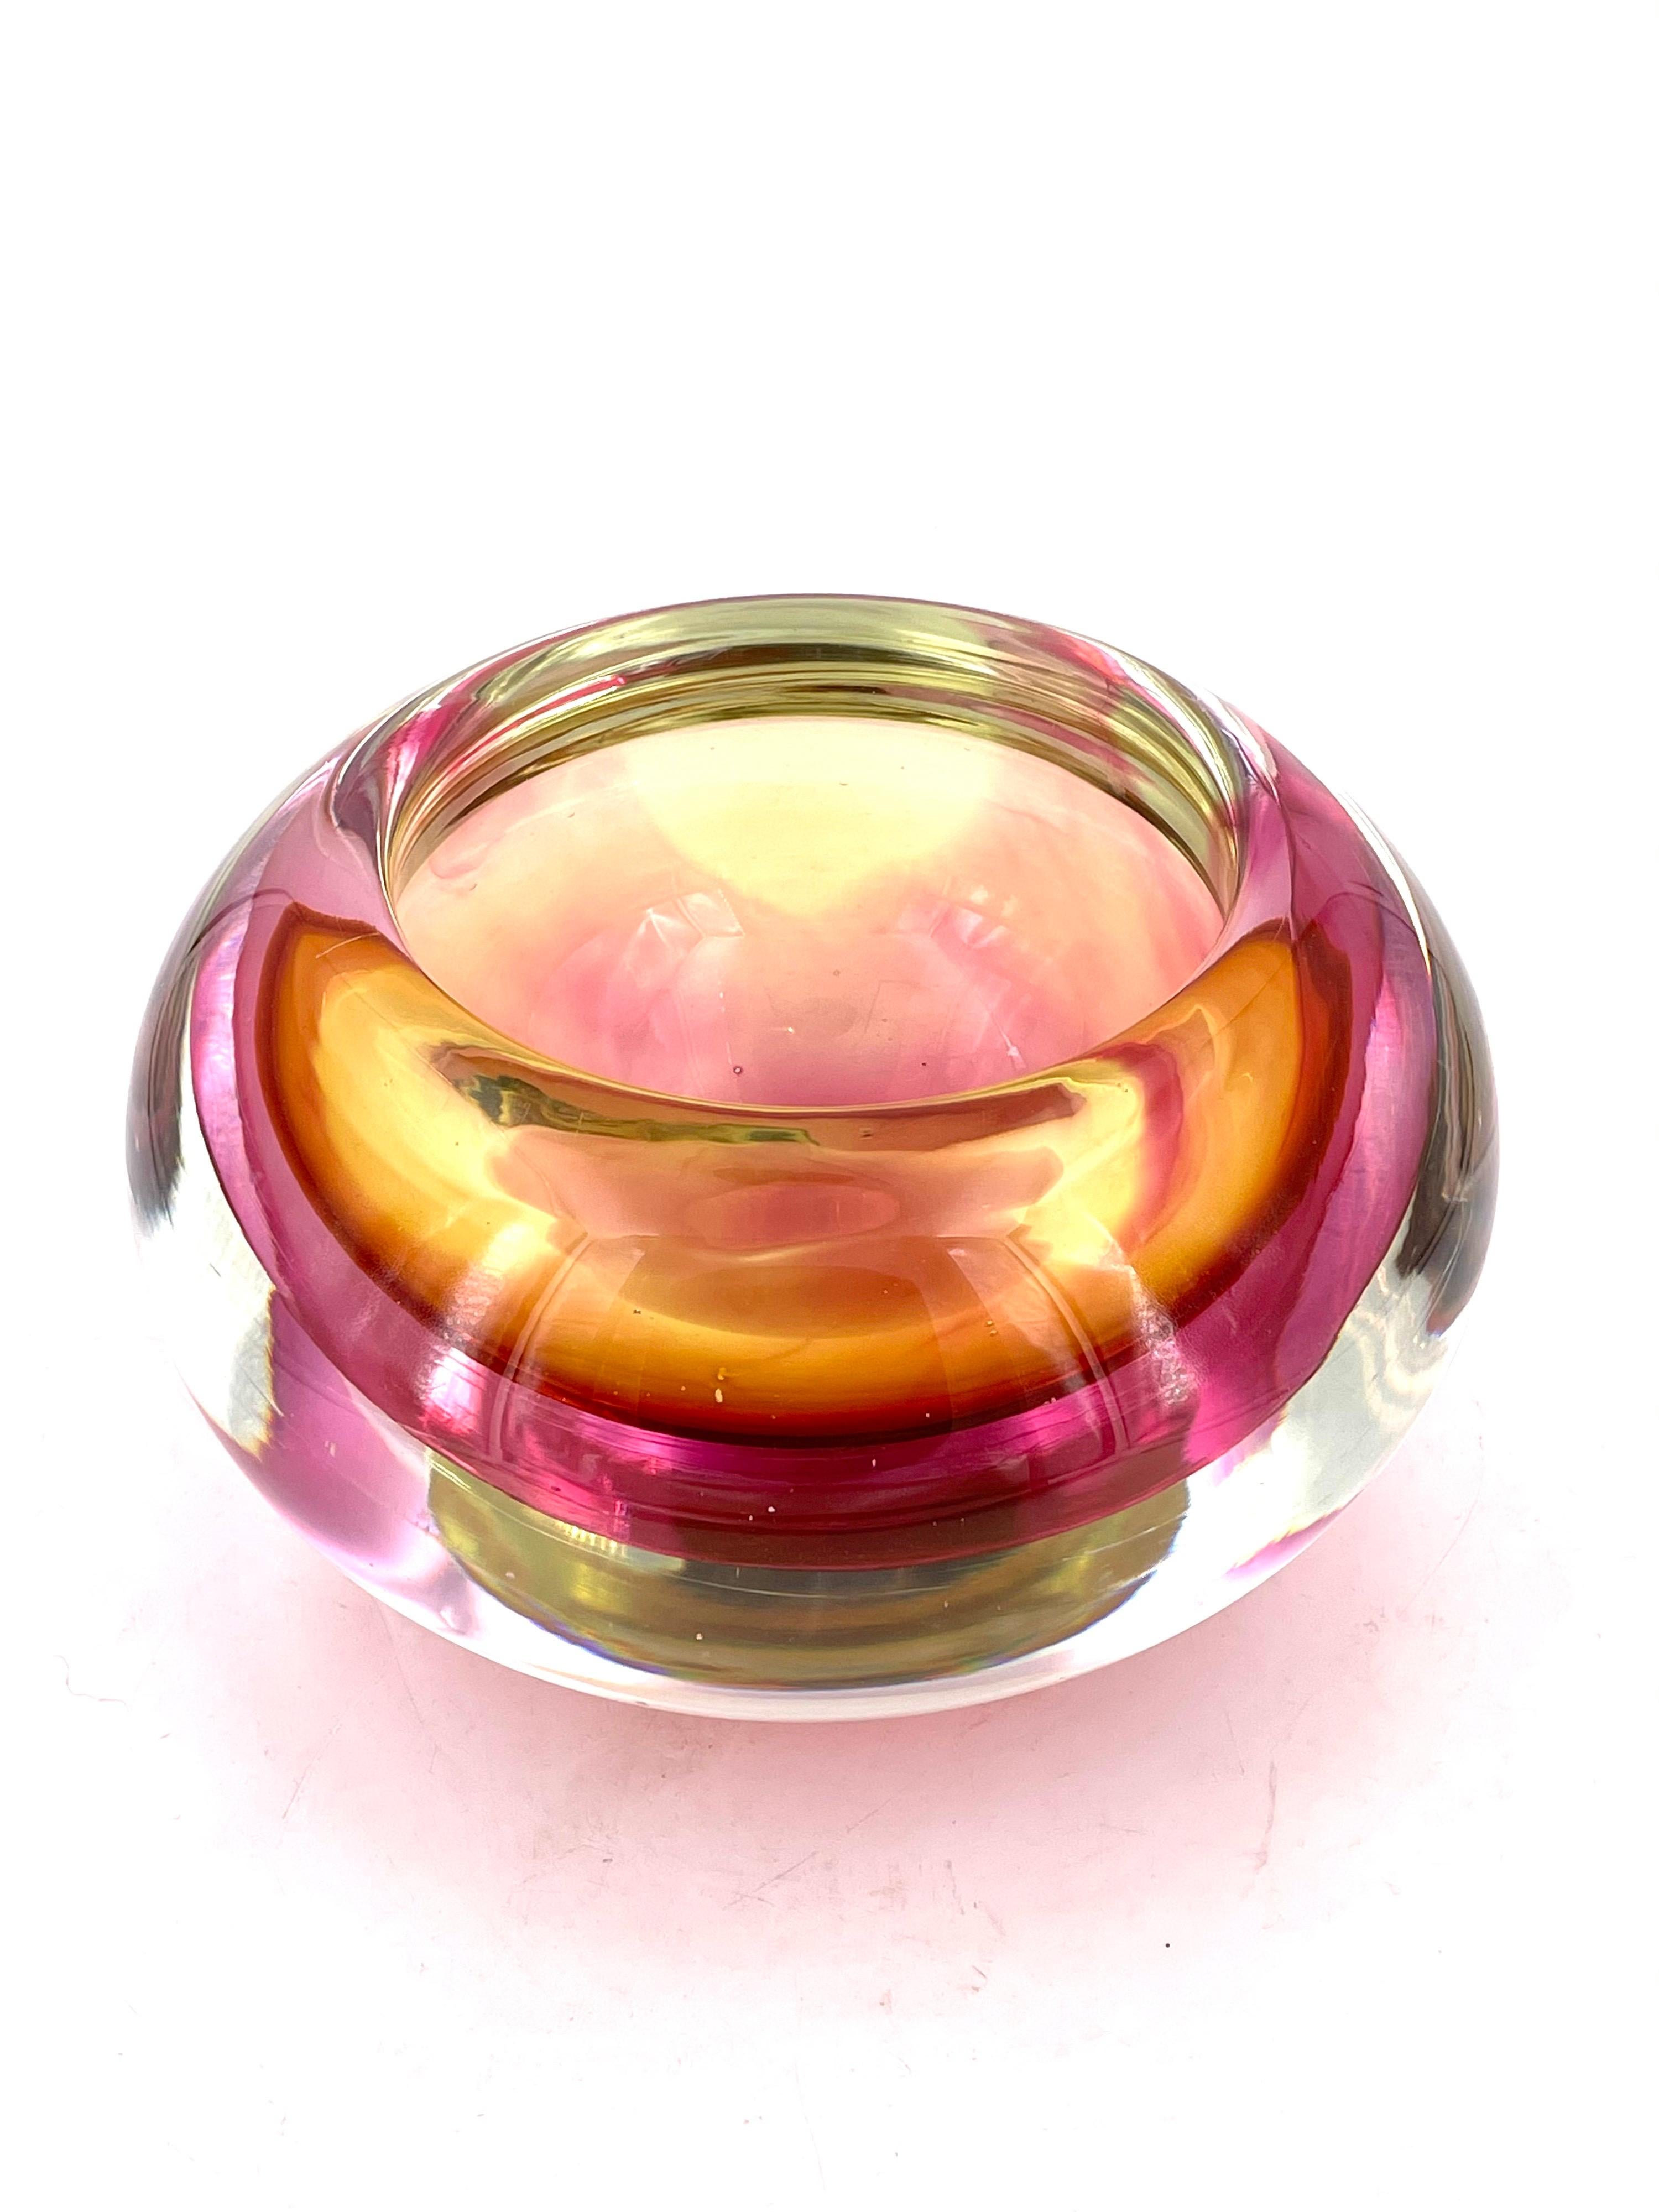 Amazing unique heavy walls of glass Murano Somersso bowl, excellent condition no chips or cracks beautiful colors yellow pink clear, nice and heavy, circa 1970s.